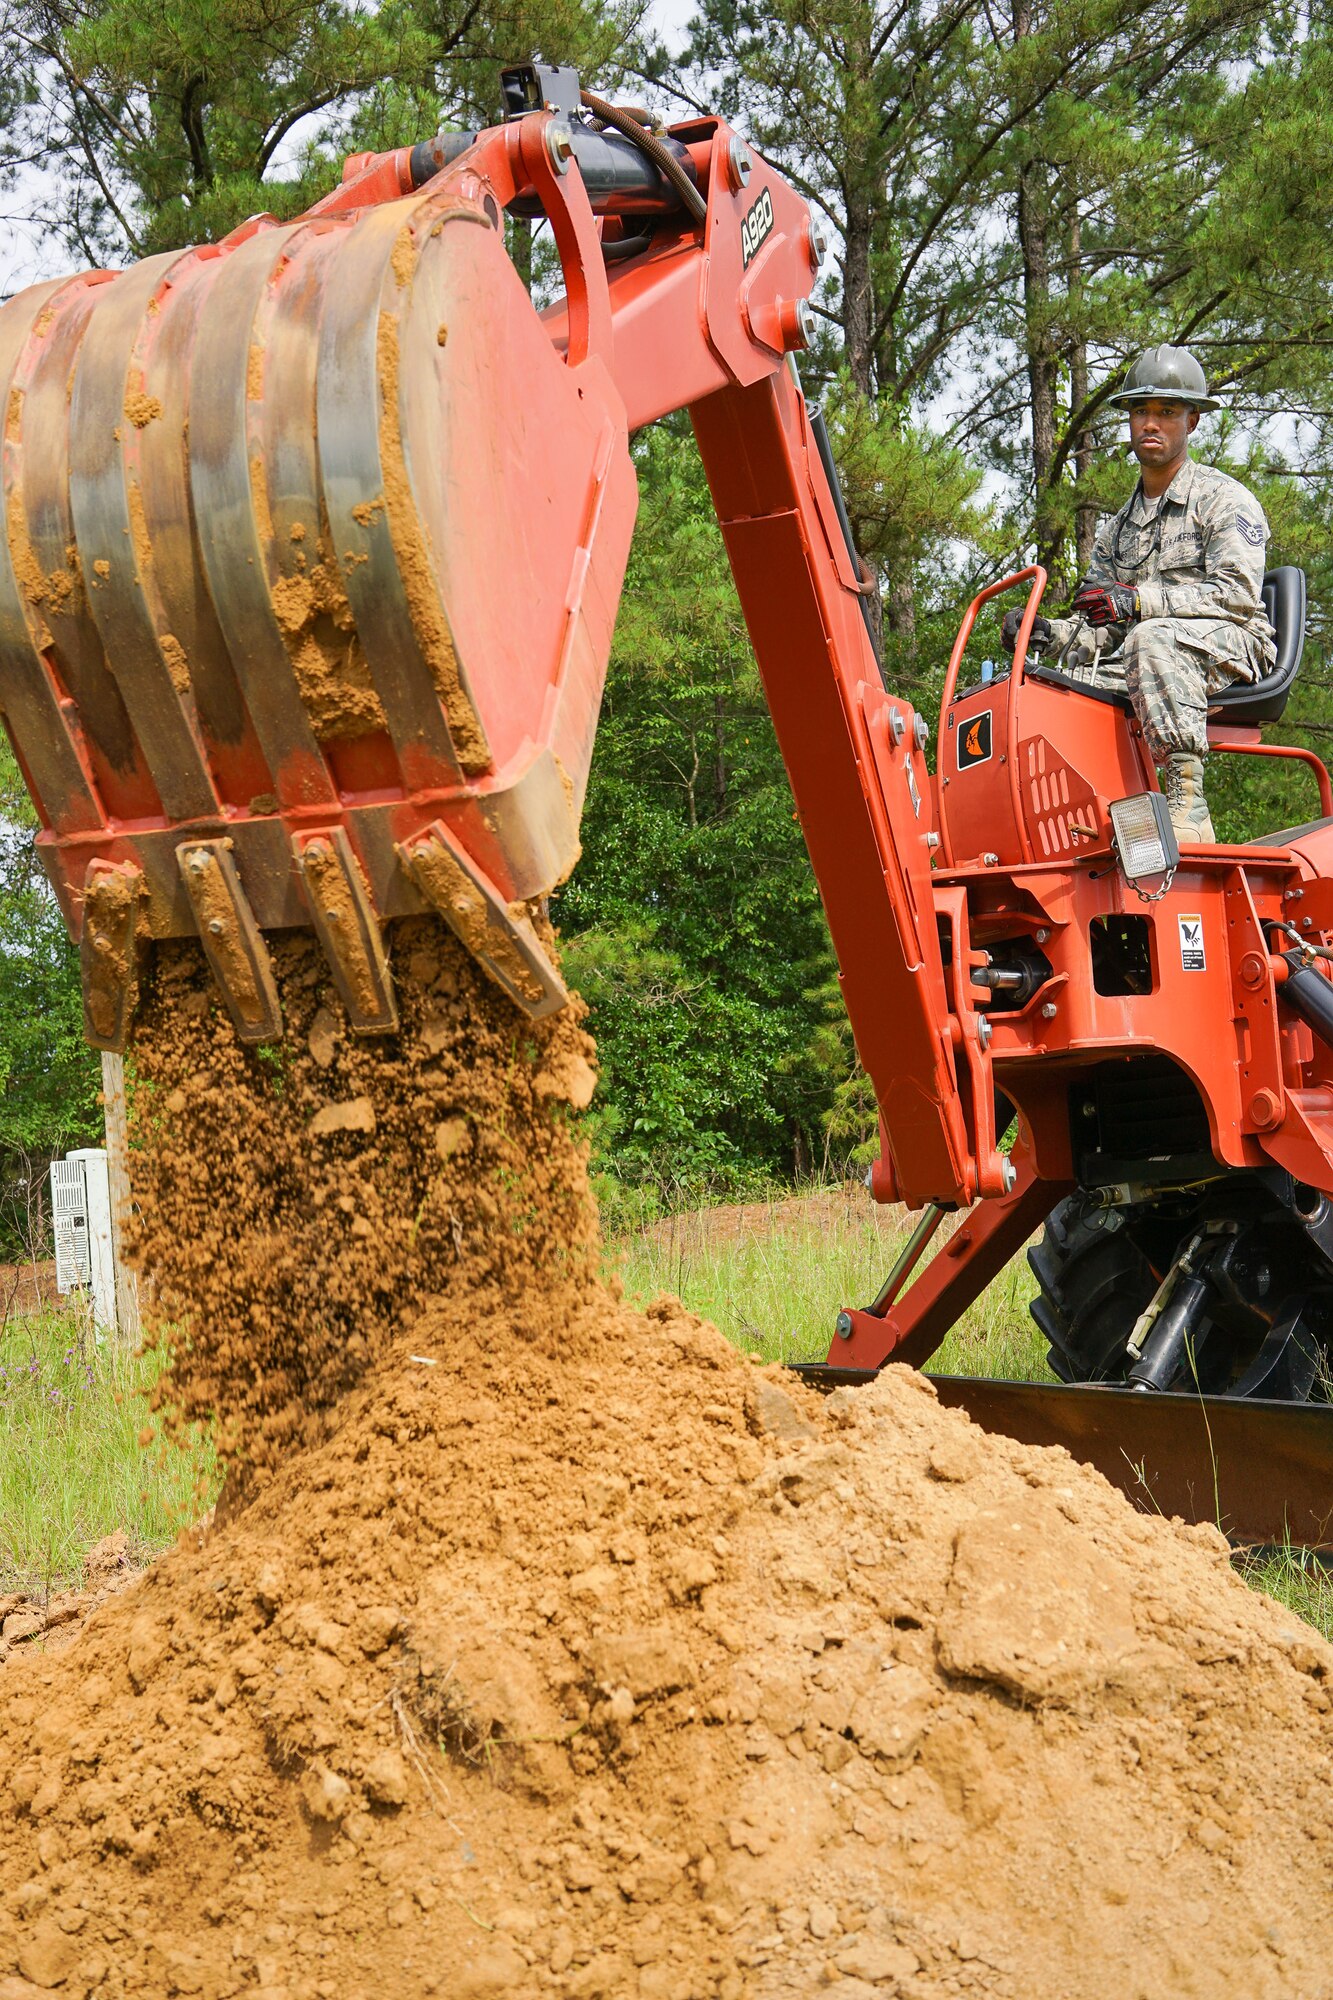 U.S. Air Force Staff Sgt. Joseph Jones, a cable and antenna systems specialist with the 202nd Engineering Installation Squadron (EIS), Georgia Air National Guard, digs a trench using a trencher with a backhoe attachment during a weeklong training exercise at Robins Air Force Base, Ga., June 11, 2015. More than 80 Airmen were certified in career-field tasks crucial to the unit’s deployed and homeland missions. The 202nd EIS supports the 116th Air Control Wing and is responsible for the fixed-communications infrastructures for 27 other locations, including the 165th Airlift Wing in Savannah, Georgia, and Air National Guard units in Puerto Rico and the U.S. Virgin Islands. (U.S. Air National Guard photo by Senior Master Sgt. Roger Parsons/Released)